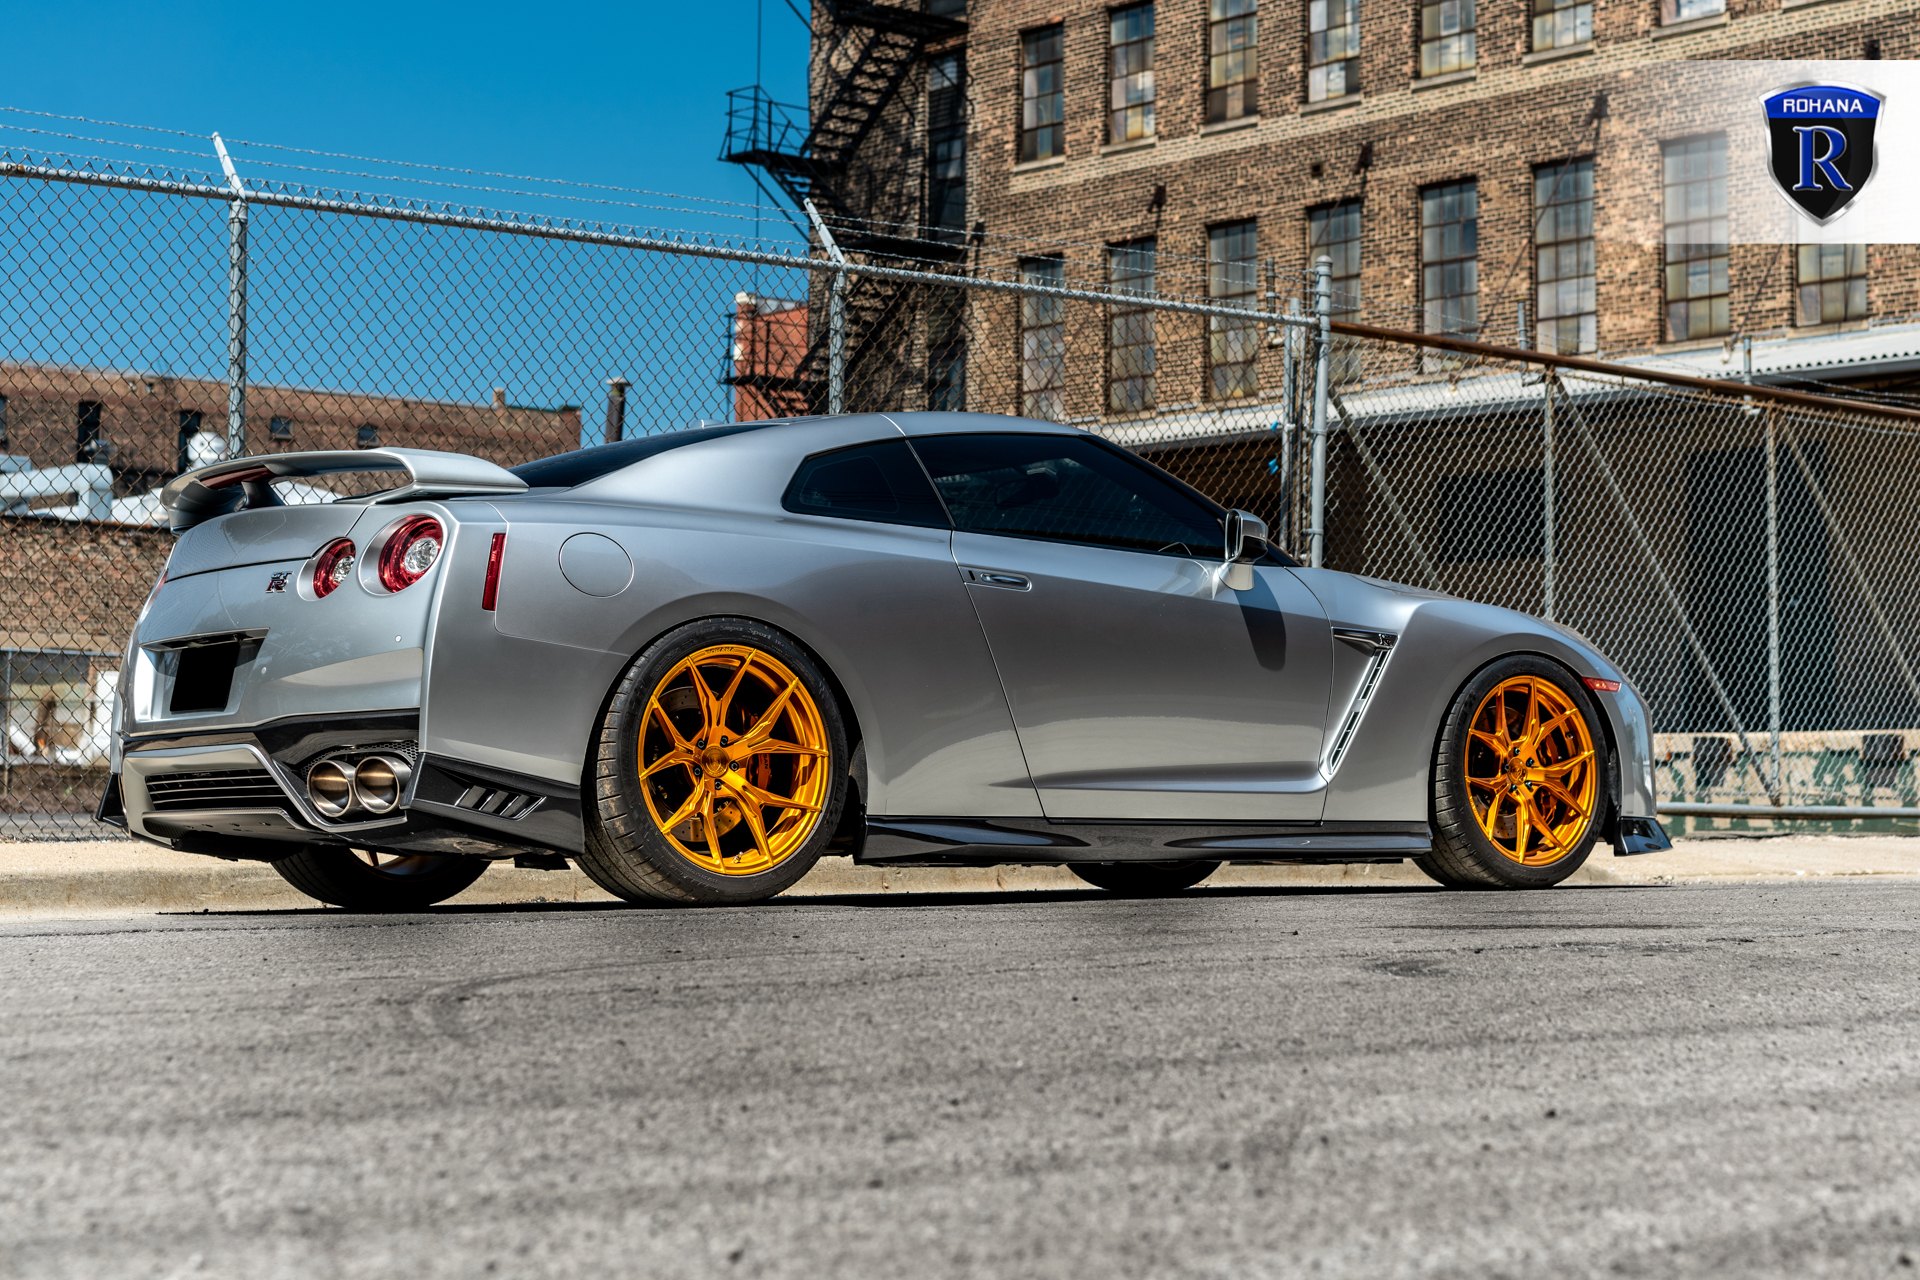 Aftermarket Rear Spoiler with Light on Silver Nissan GT-R - Photo by Rohana Wheels